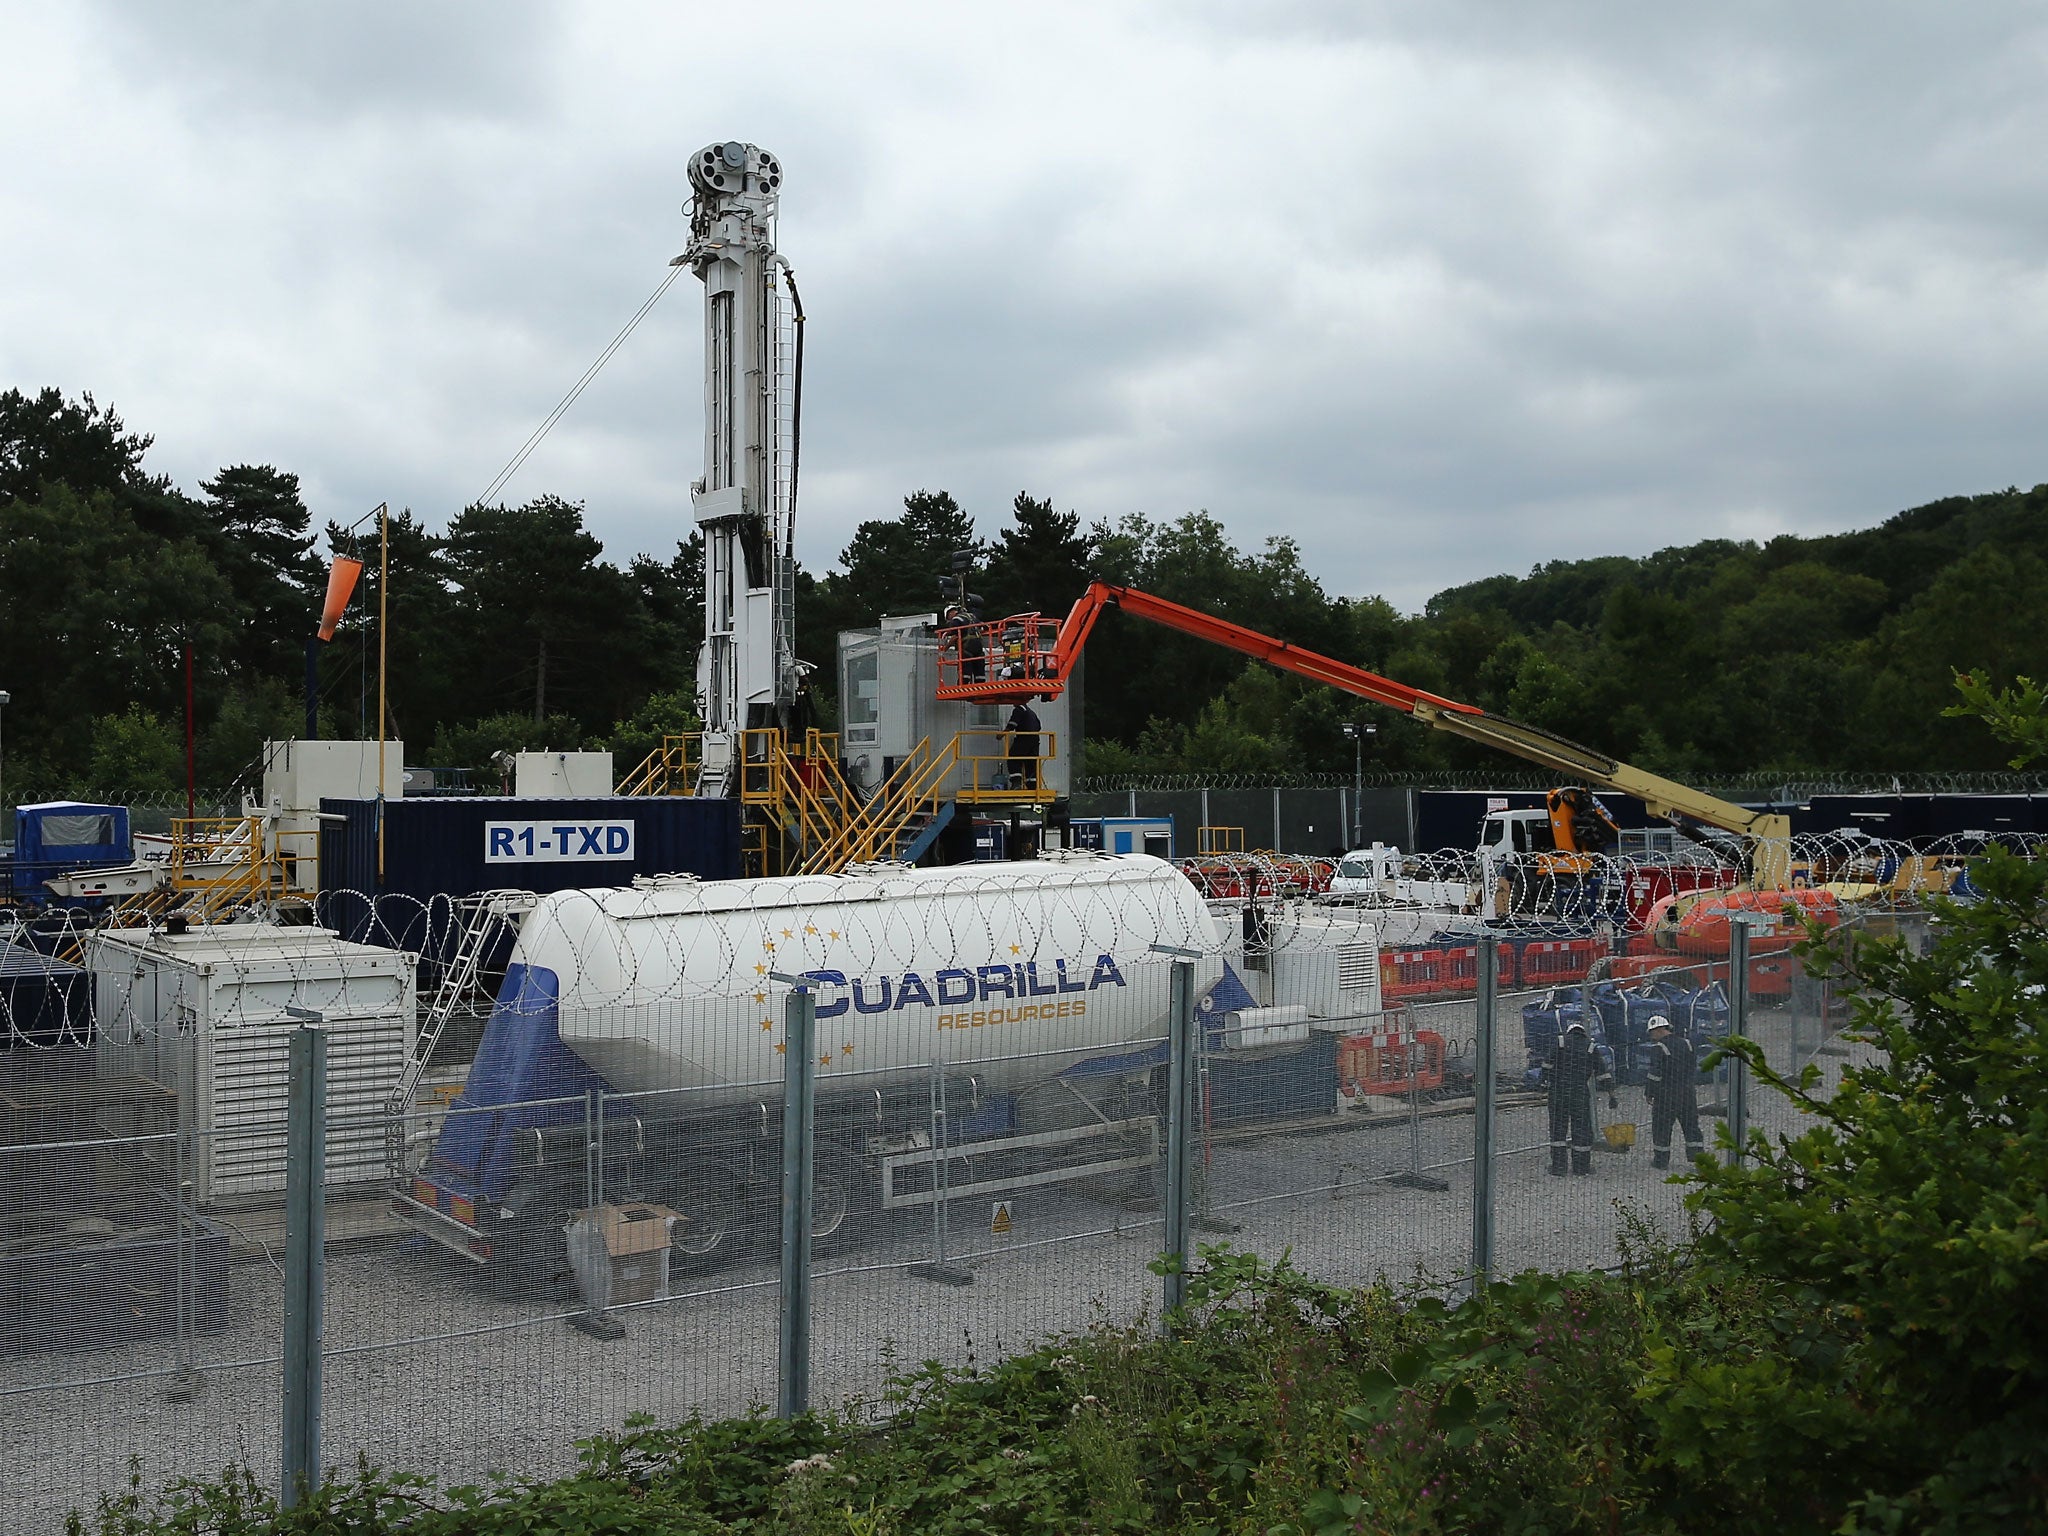 Cuadrilla operated drill site in Balcombe, West Sussex. The company has withdrawn applications for permits to frack in Lancashire